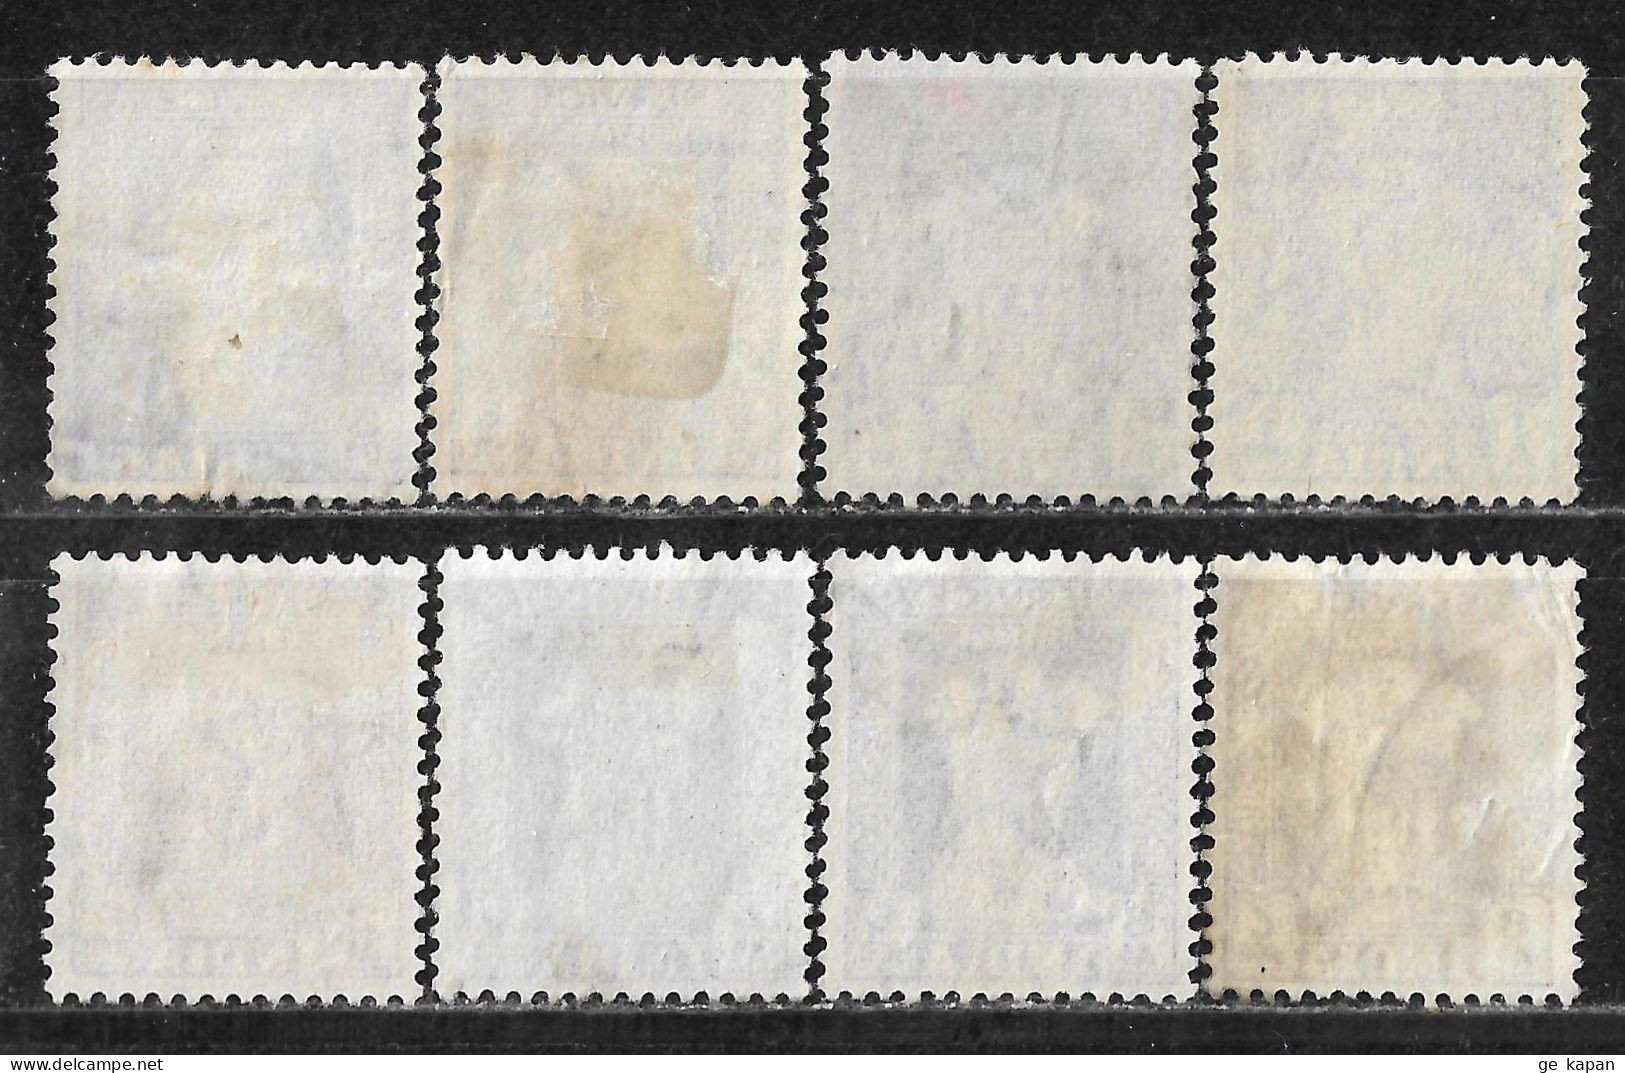 1950 INDIA SET OF 8 OFFICIAL USED STAMPS (Michel # 117-121,124-126) CV €2.20 - Official Stamps